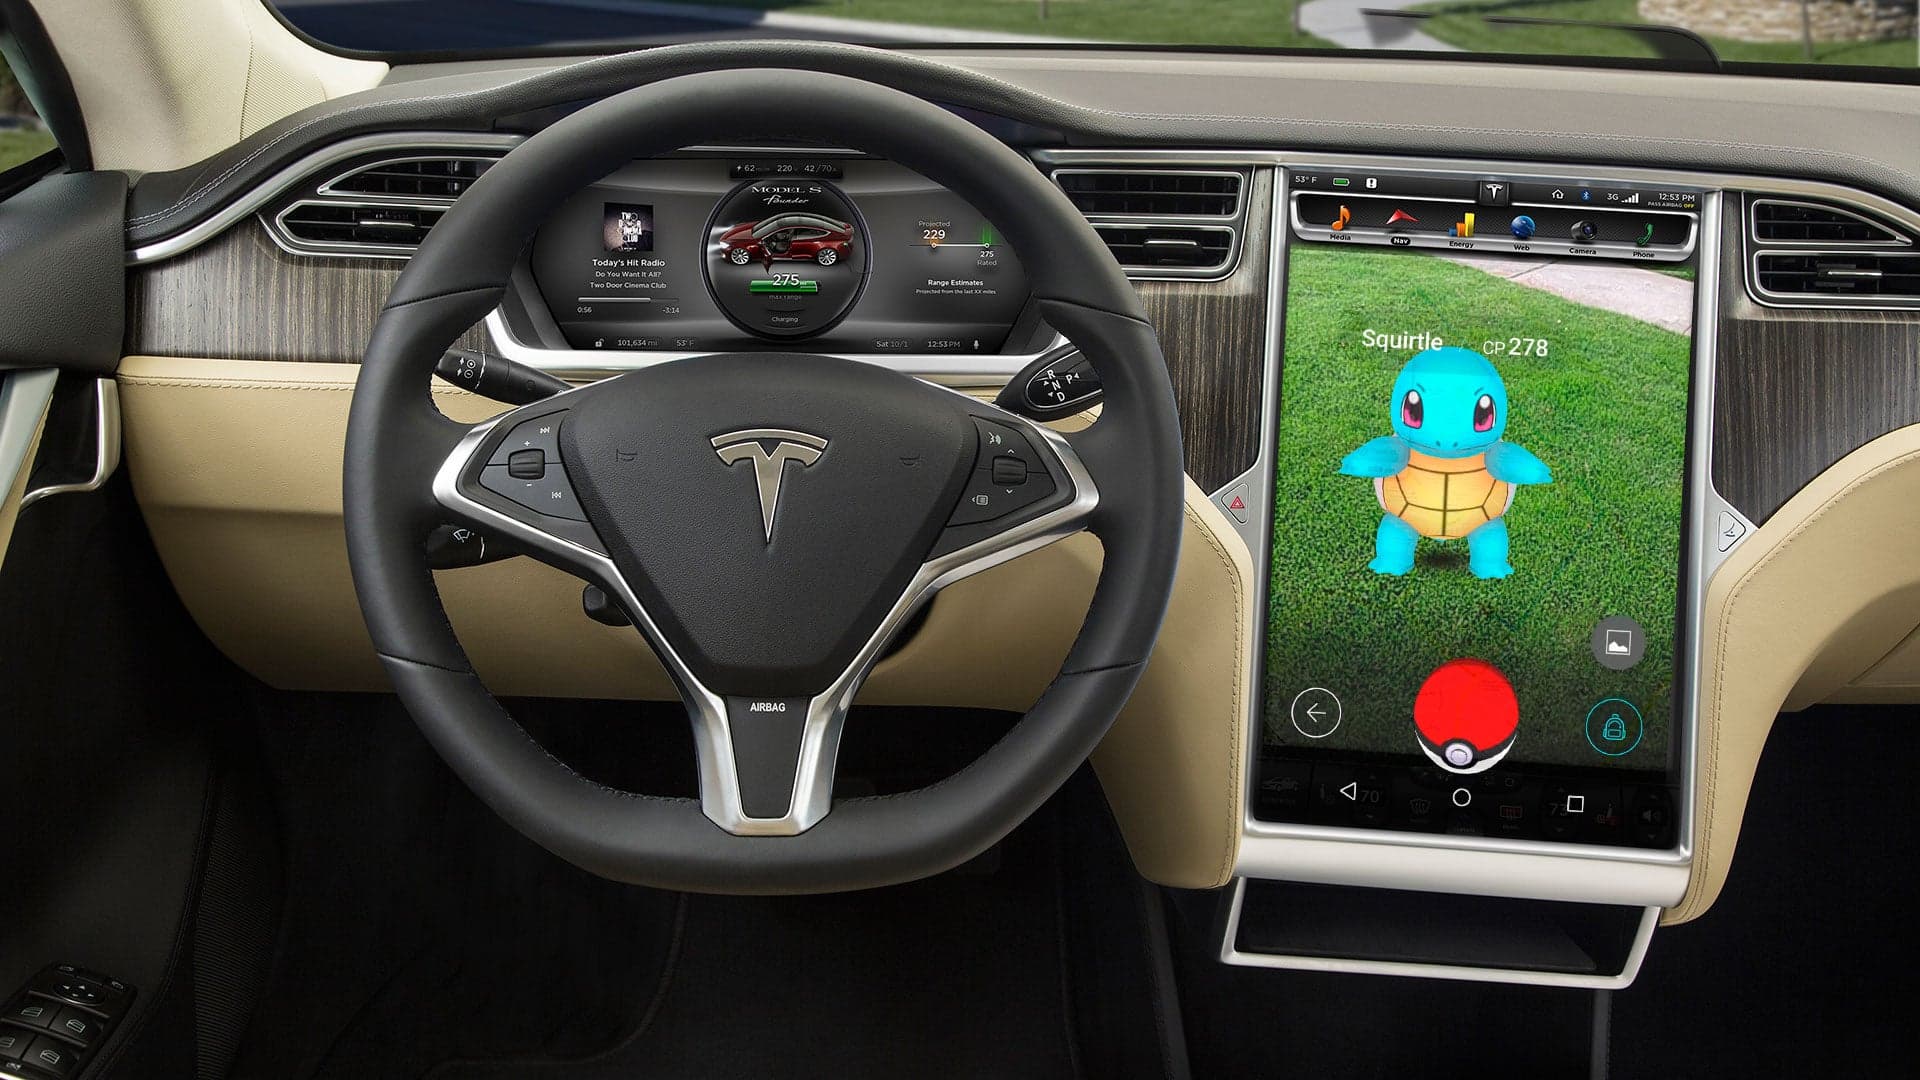 Did This Man Hack His Tesla Model S to Play Pokemon Go?